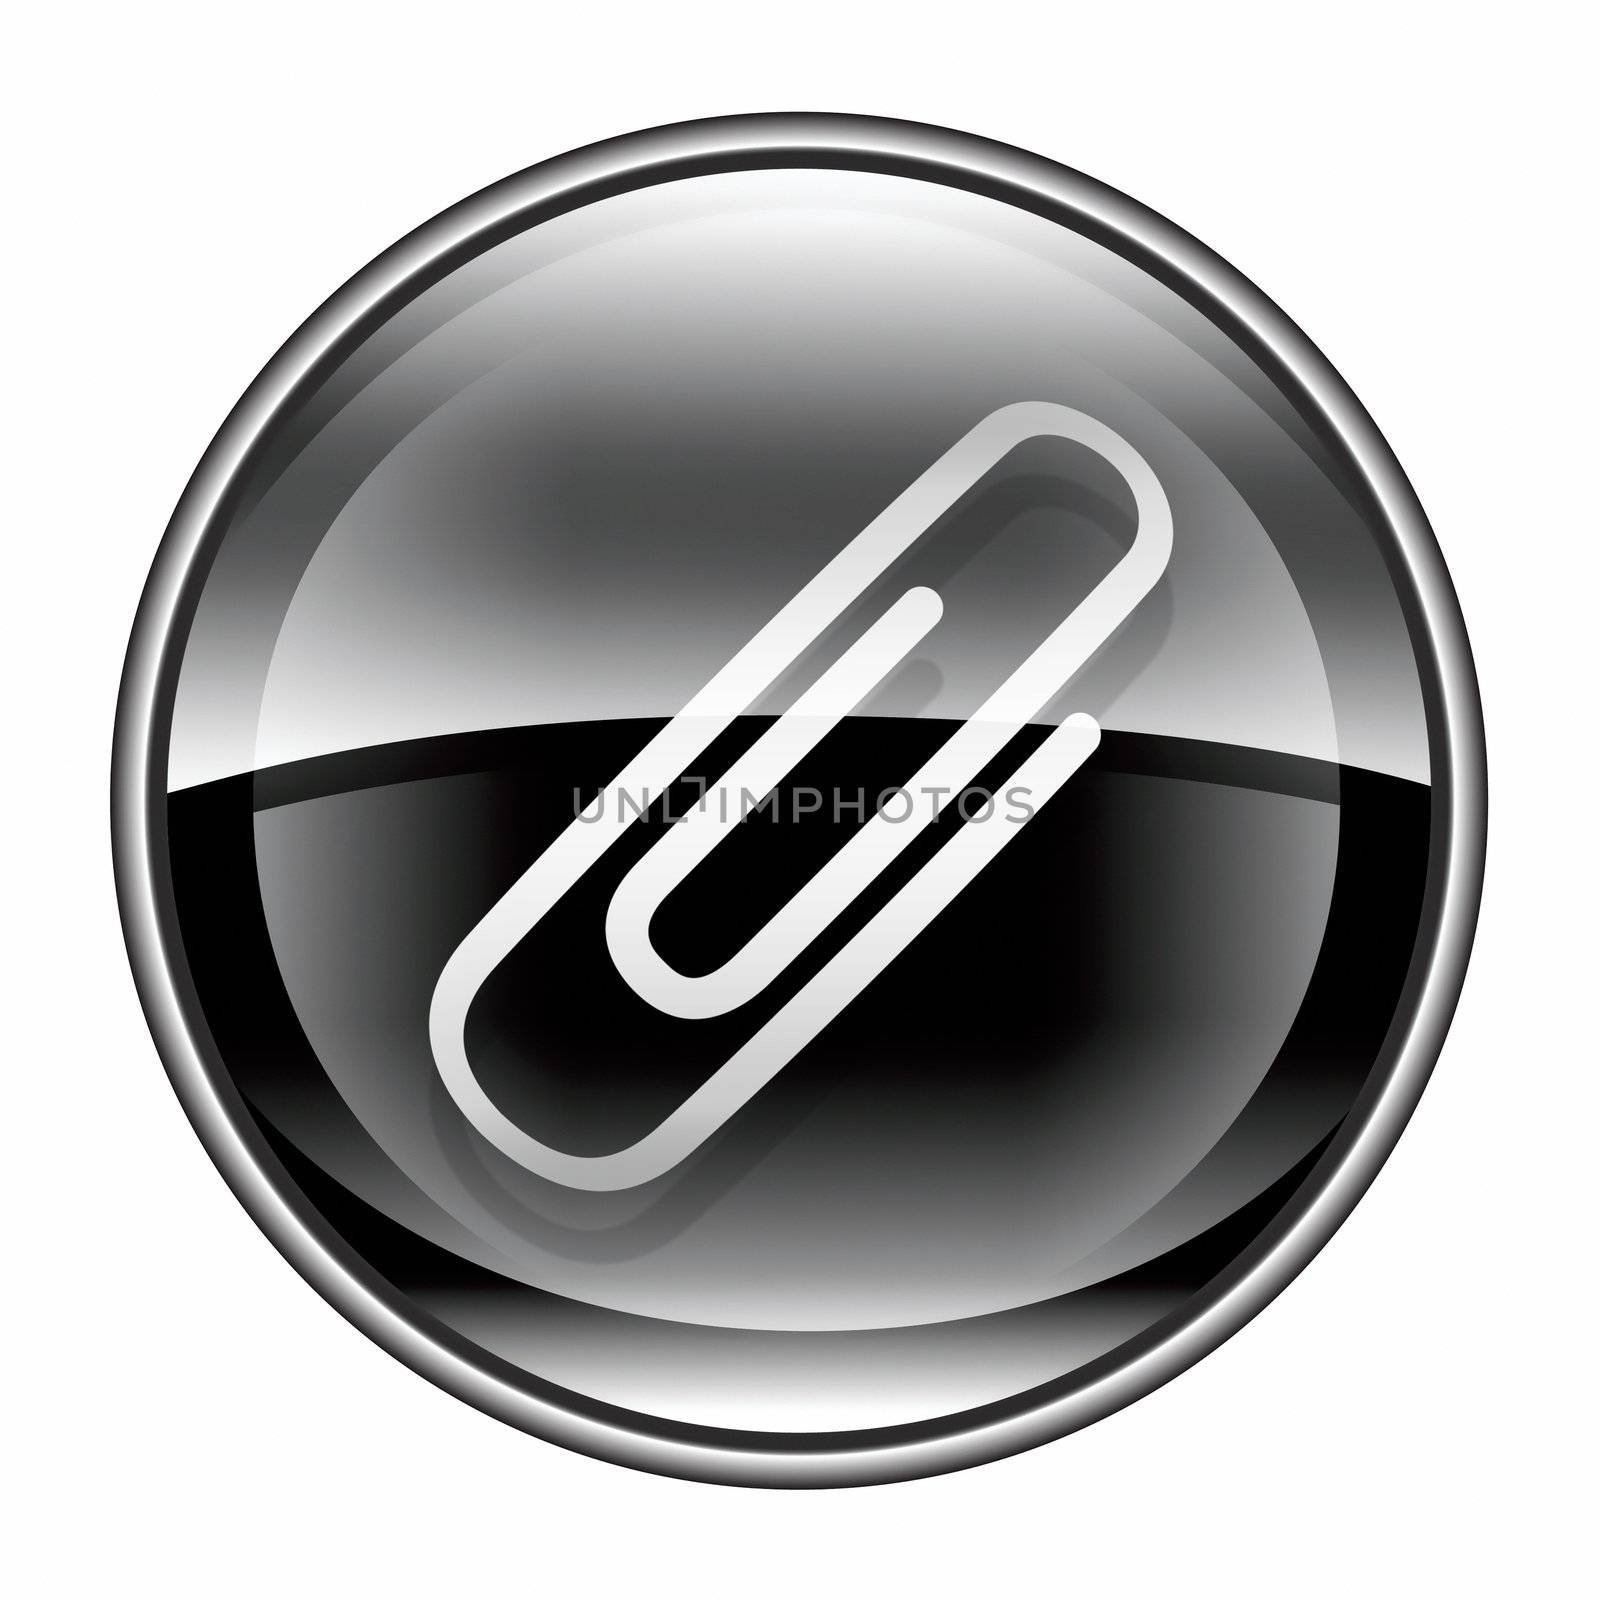 Paper clip icon black, isolated on white background by zeffss